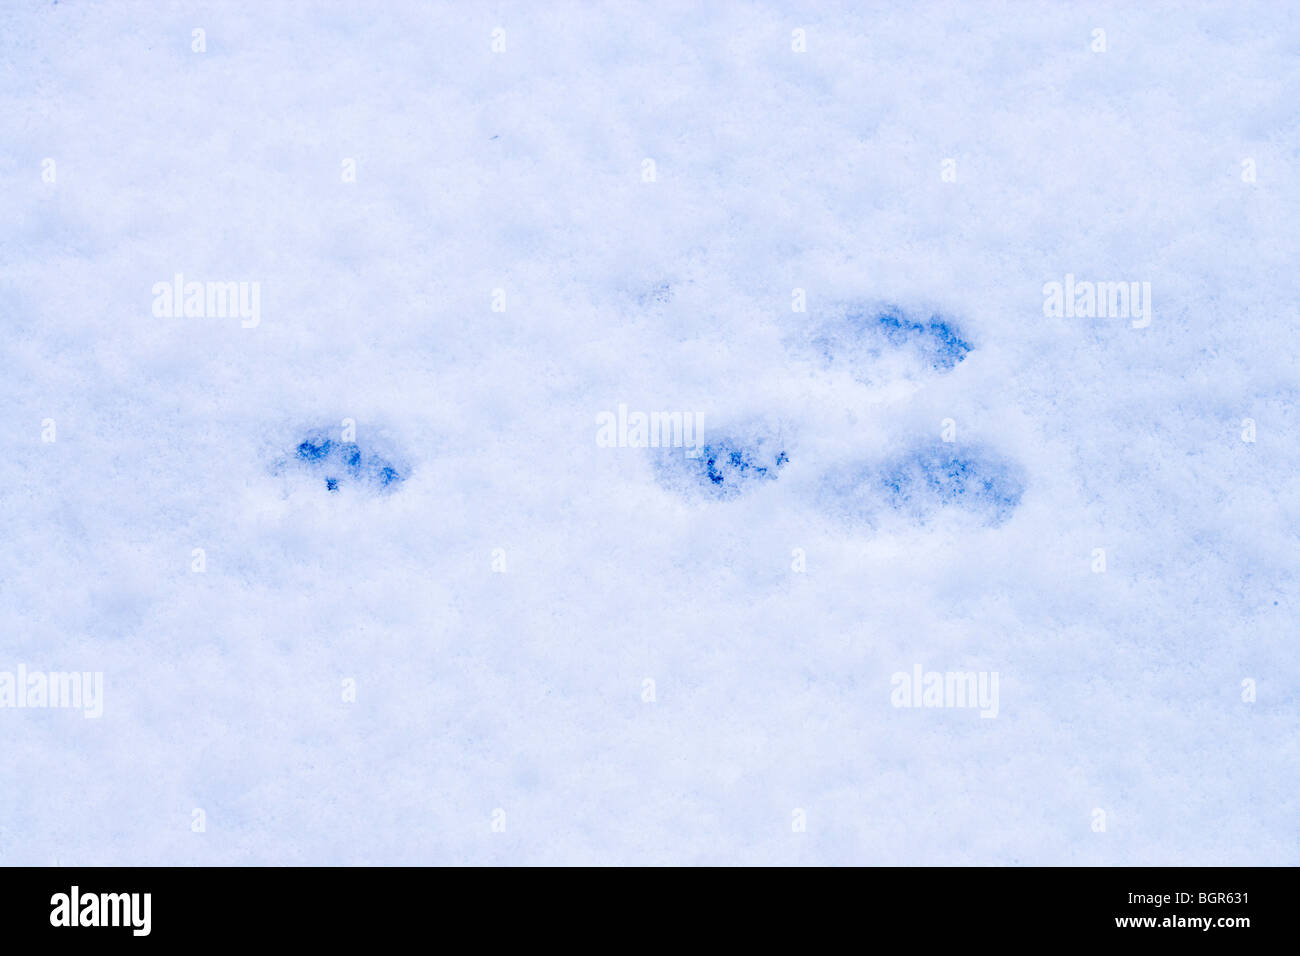 Rabbit (Oryctolagus cuniculus). Foot prints in soft melting snow. Forefoot prints on left; hind feet right- animal moving right. Stock Photo